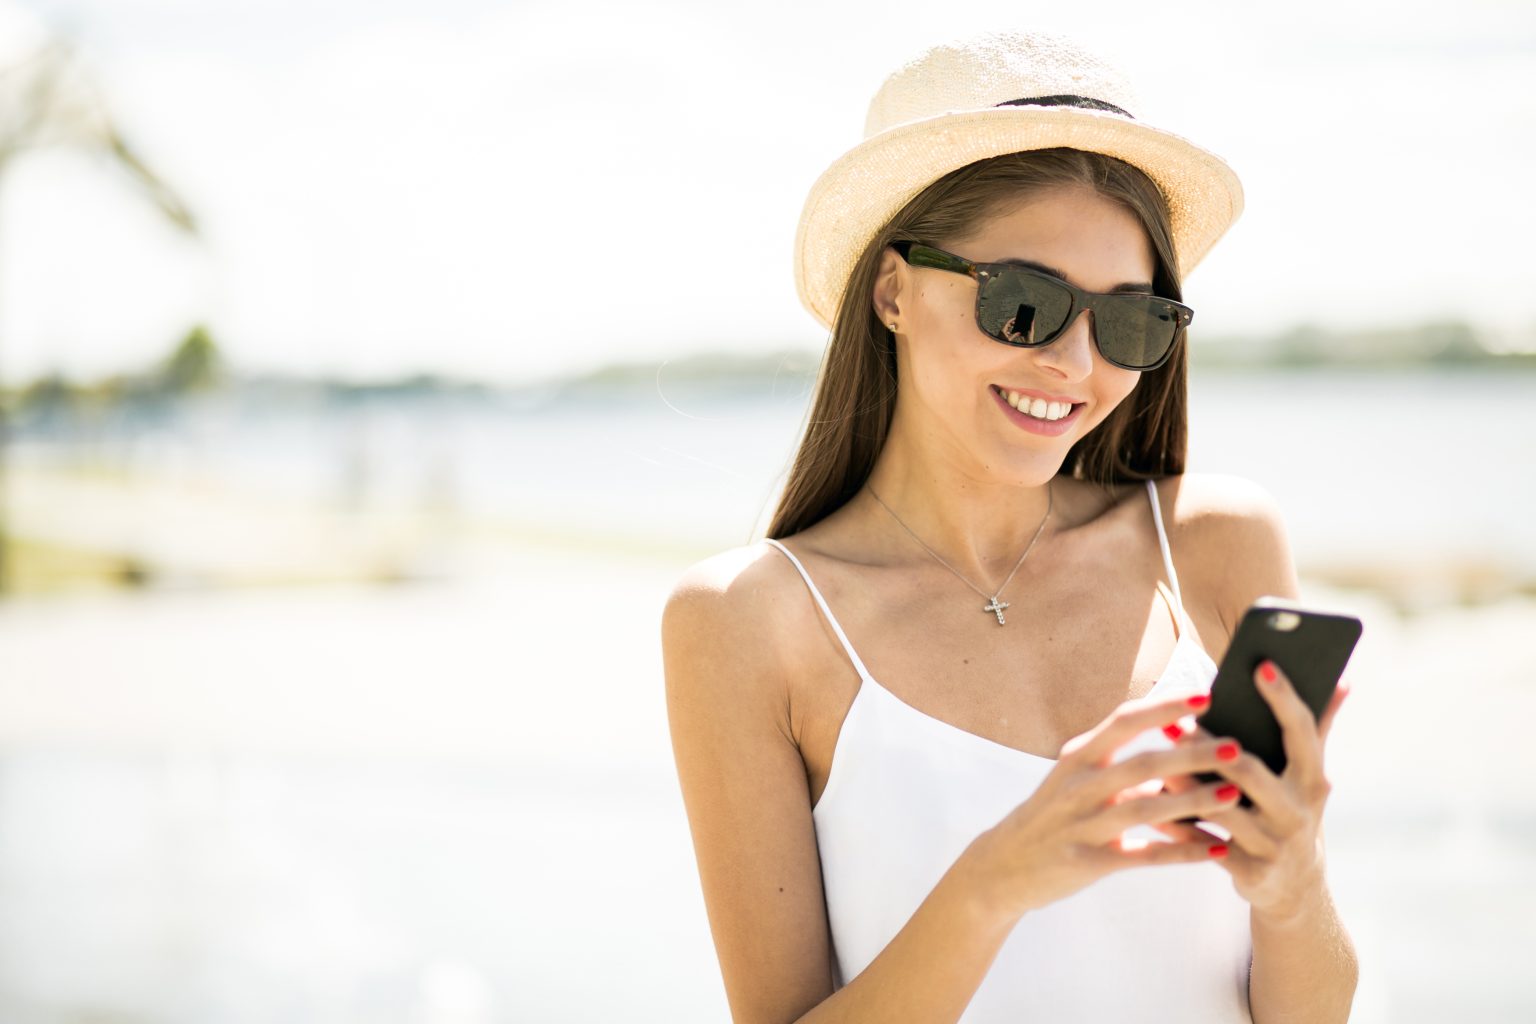 smiling woman looking at her phone